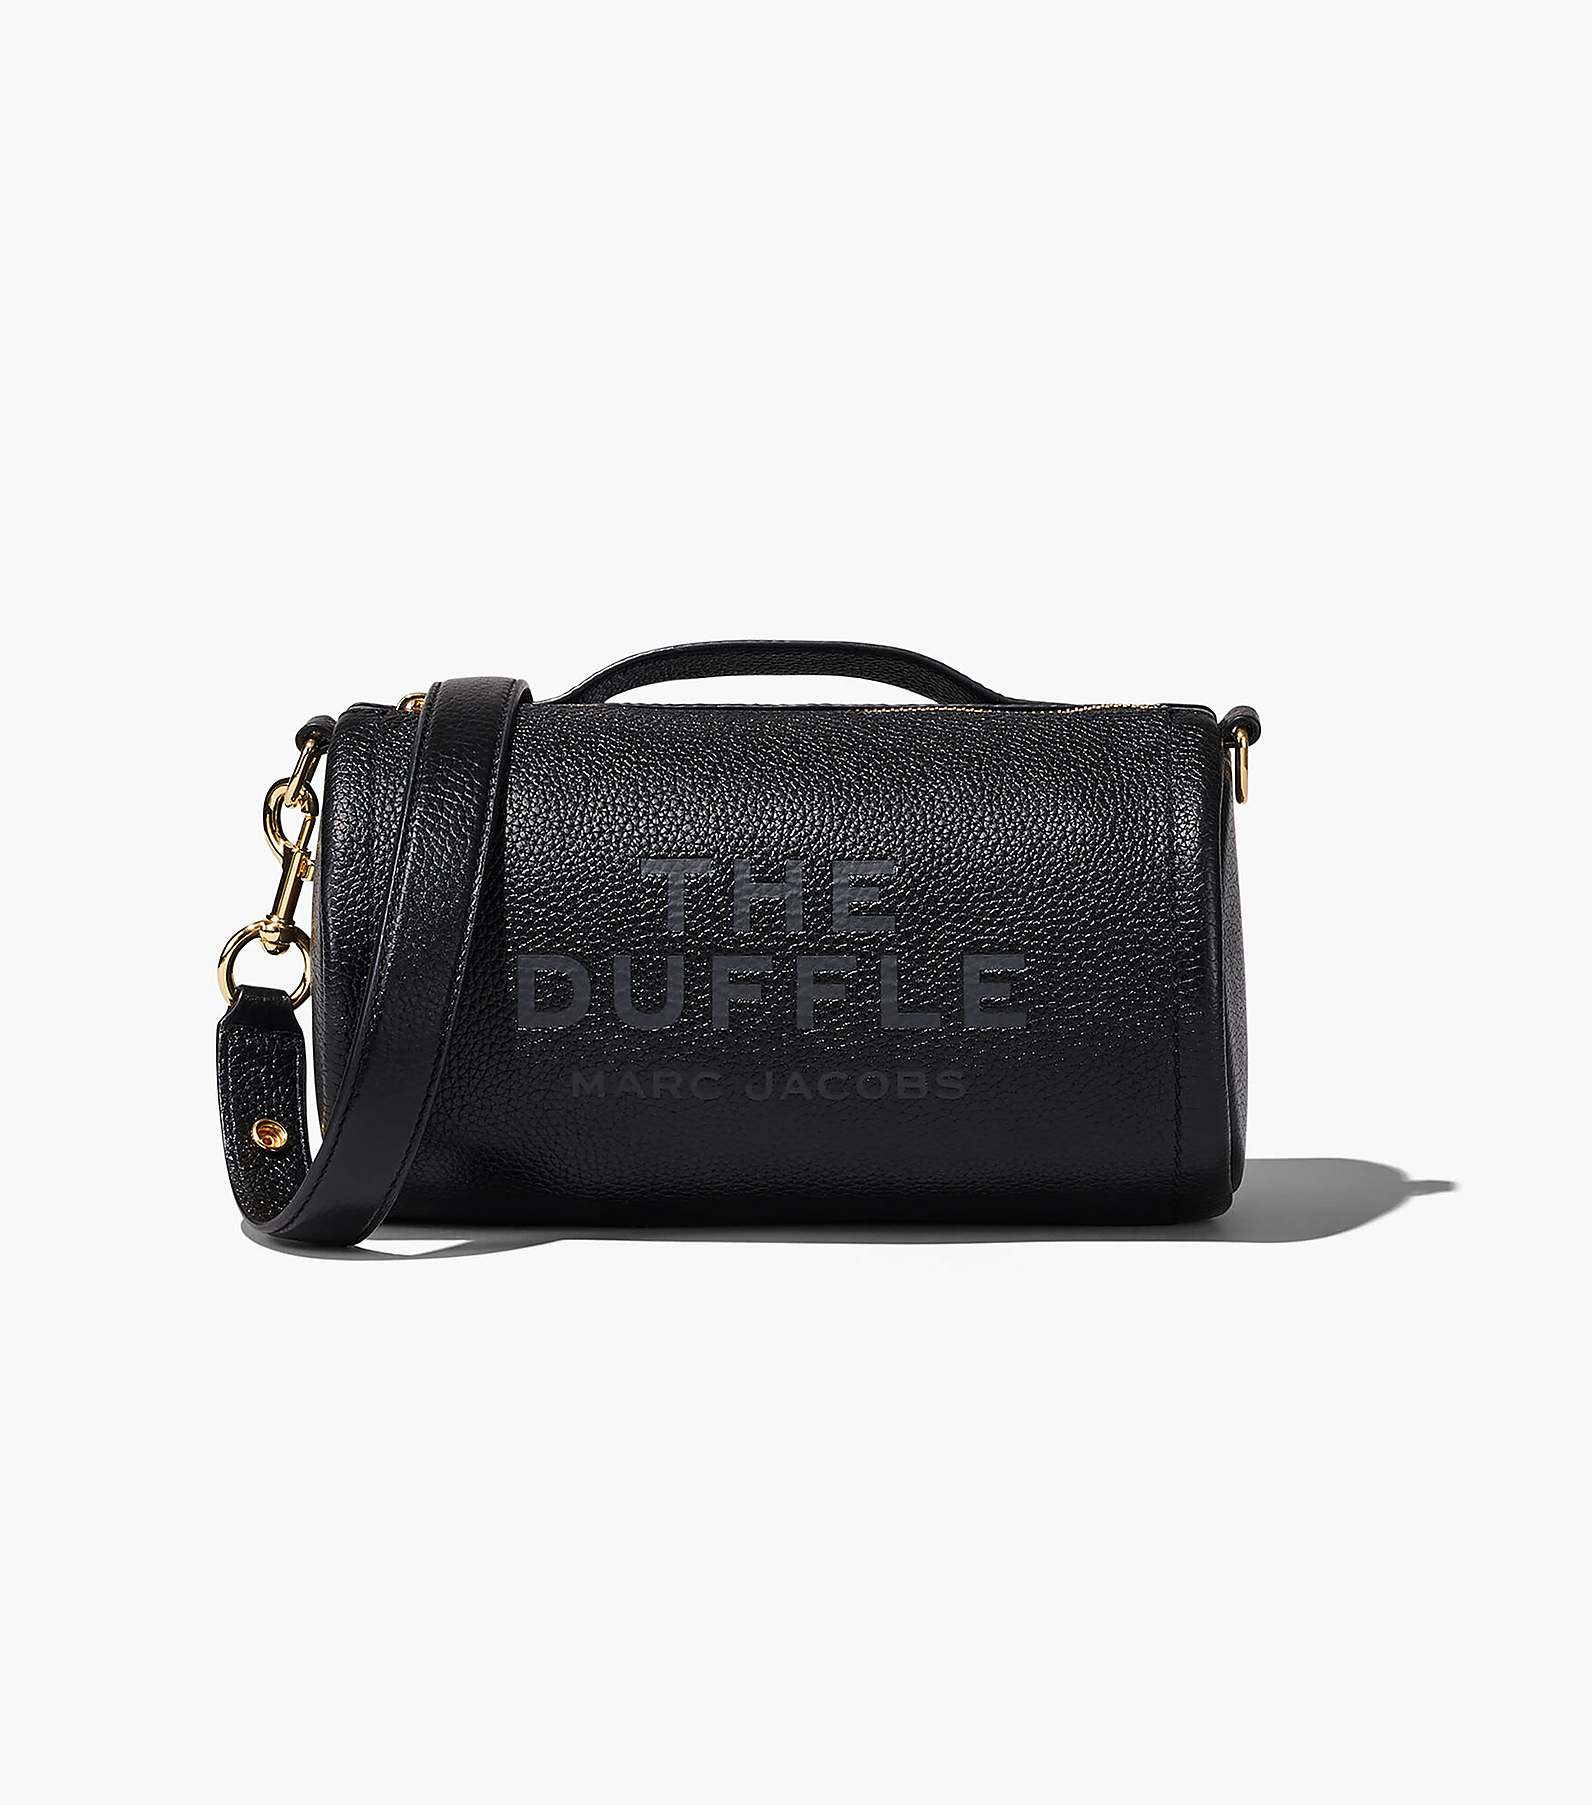 The Leather Duffle Bag(null)